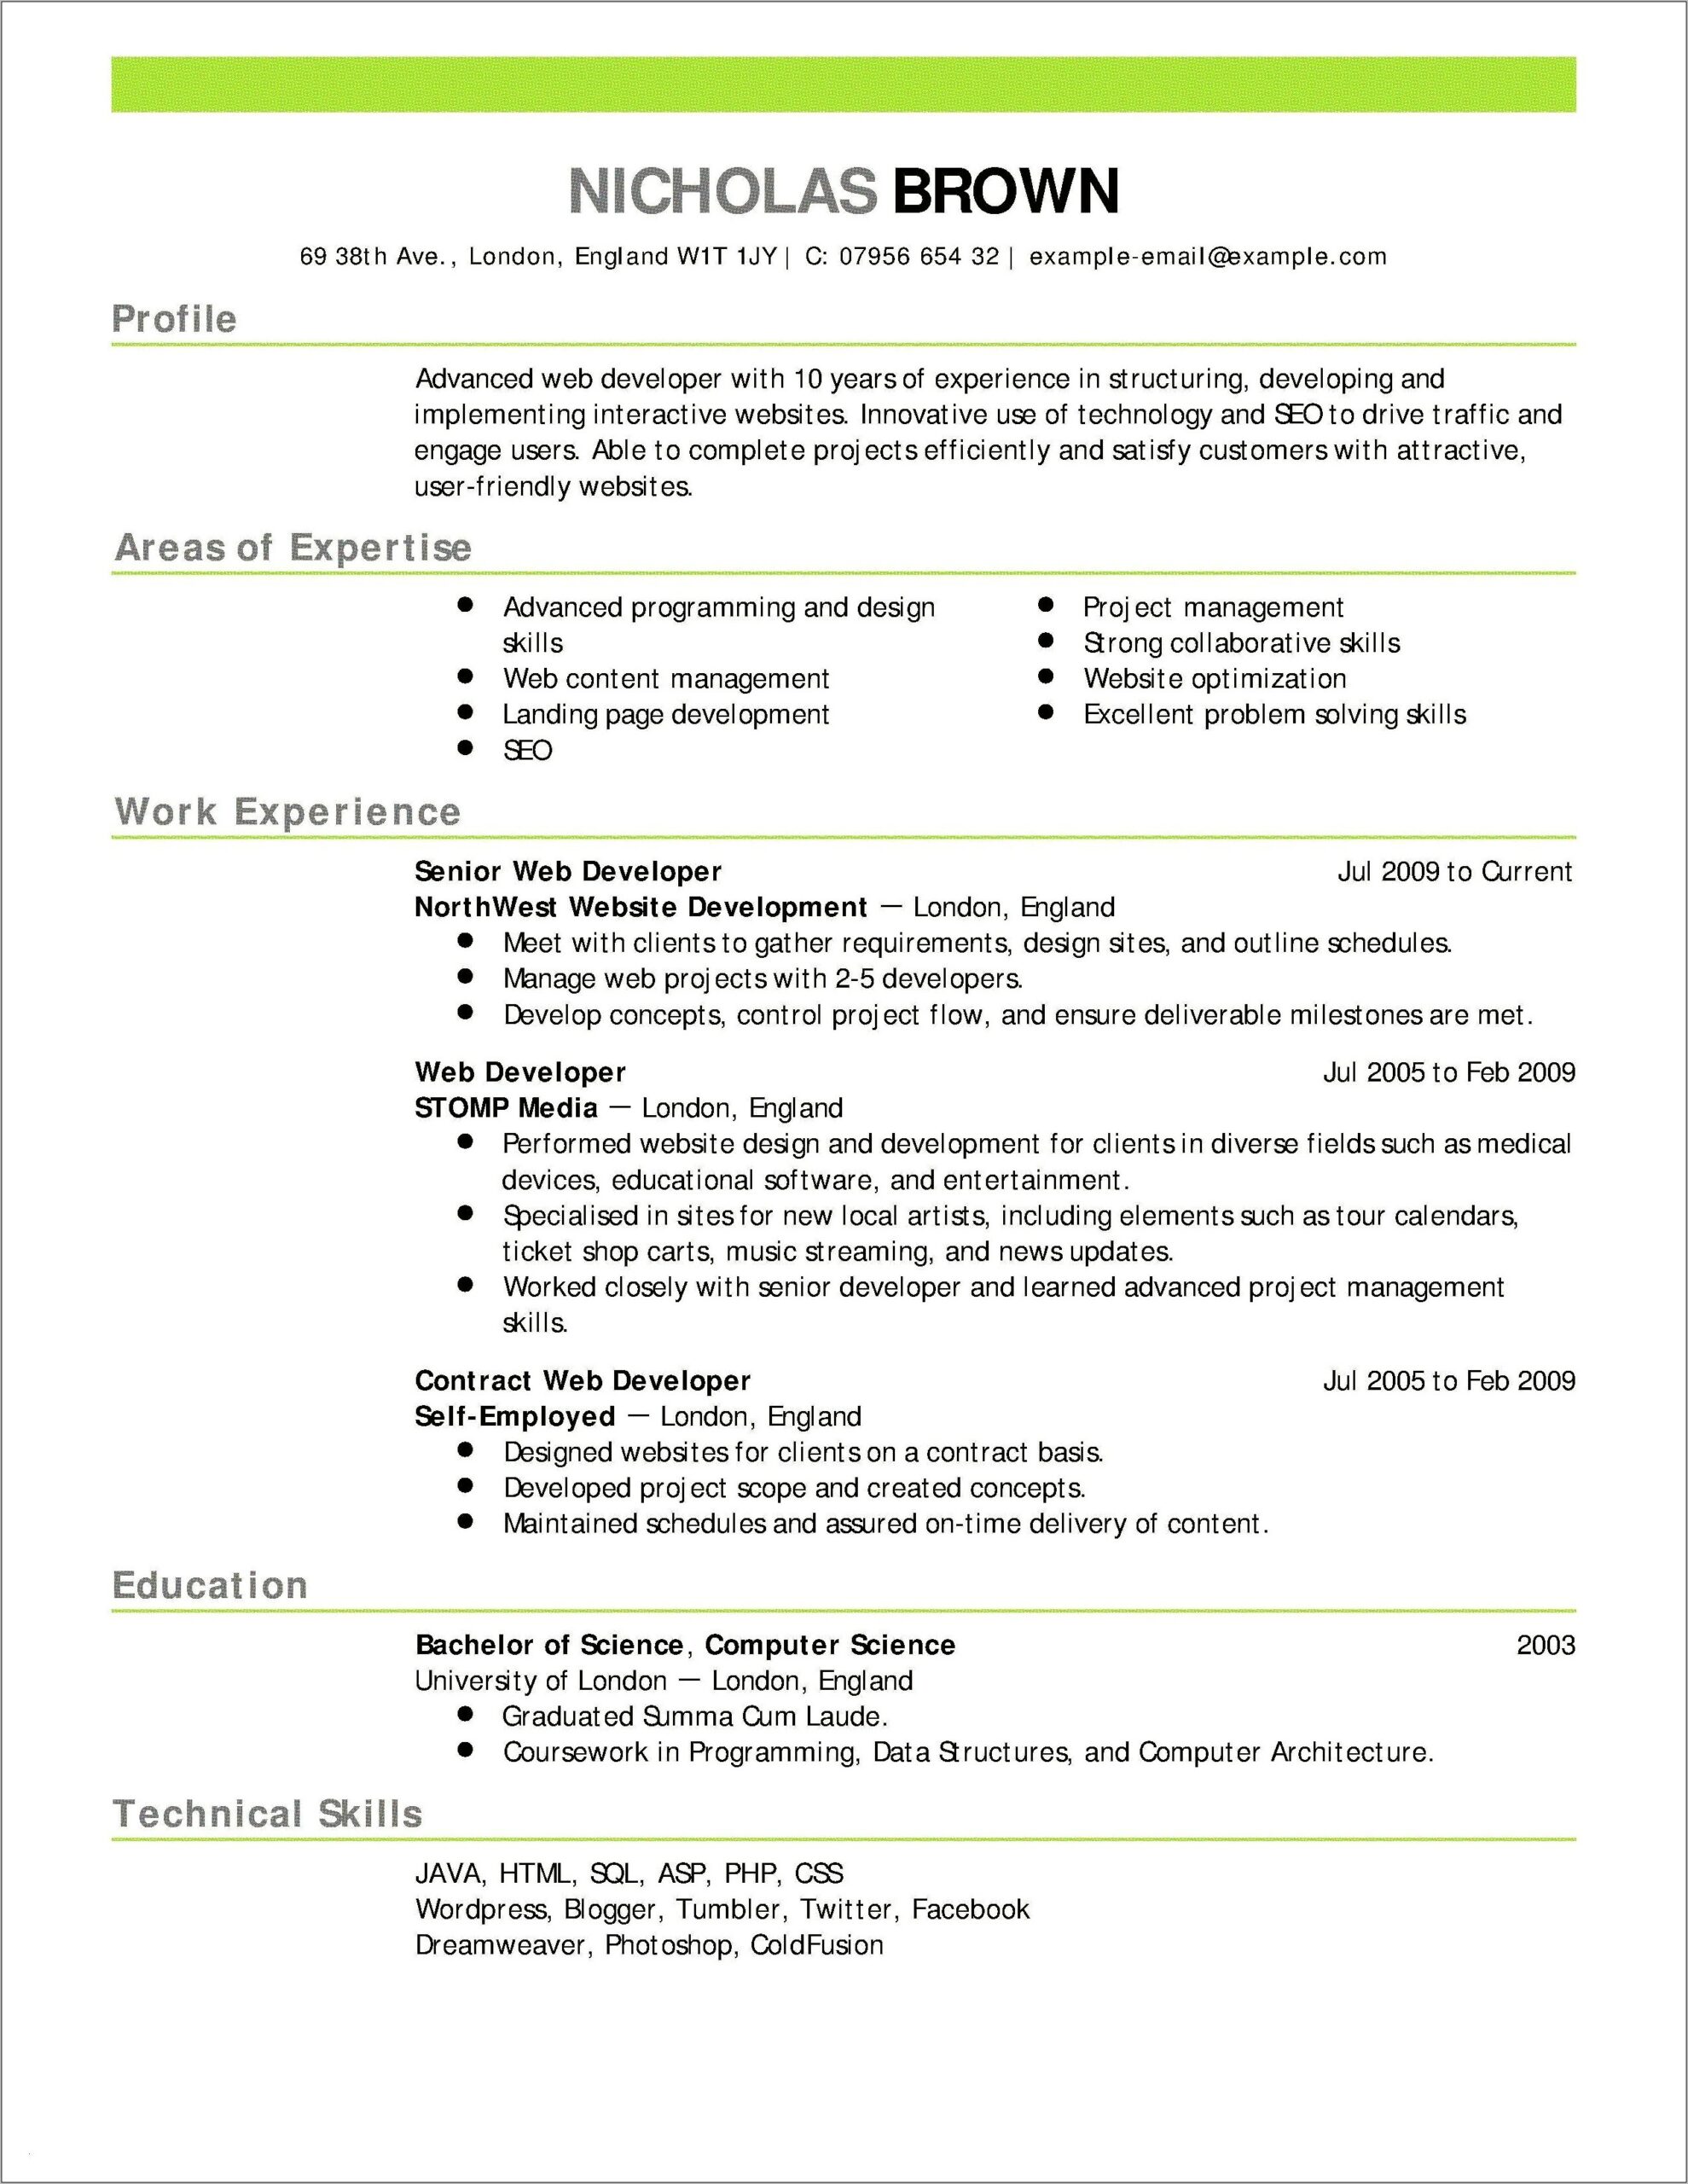 Resume Objective For Web Dev Students